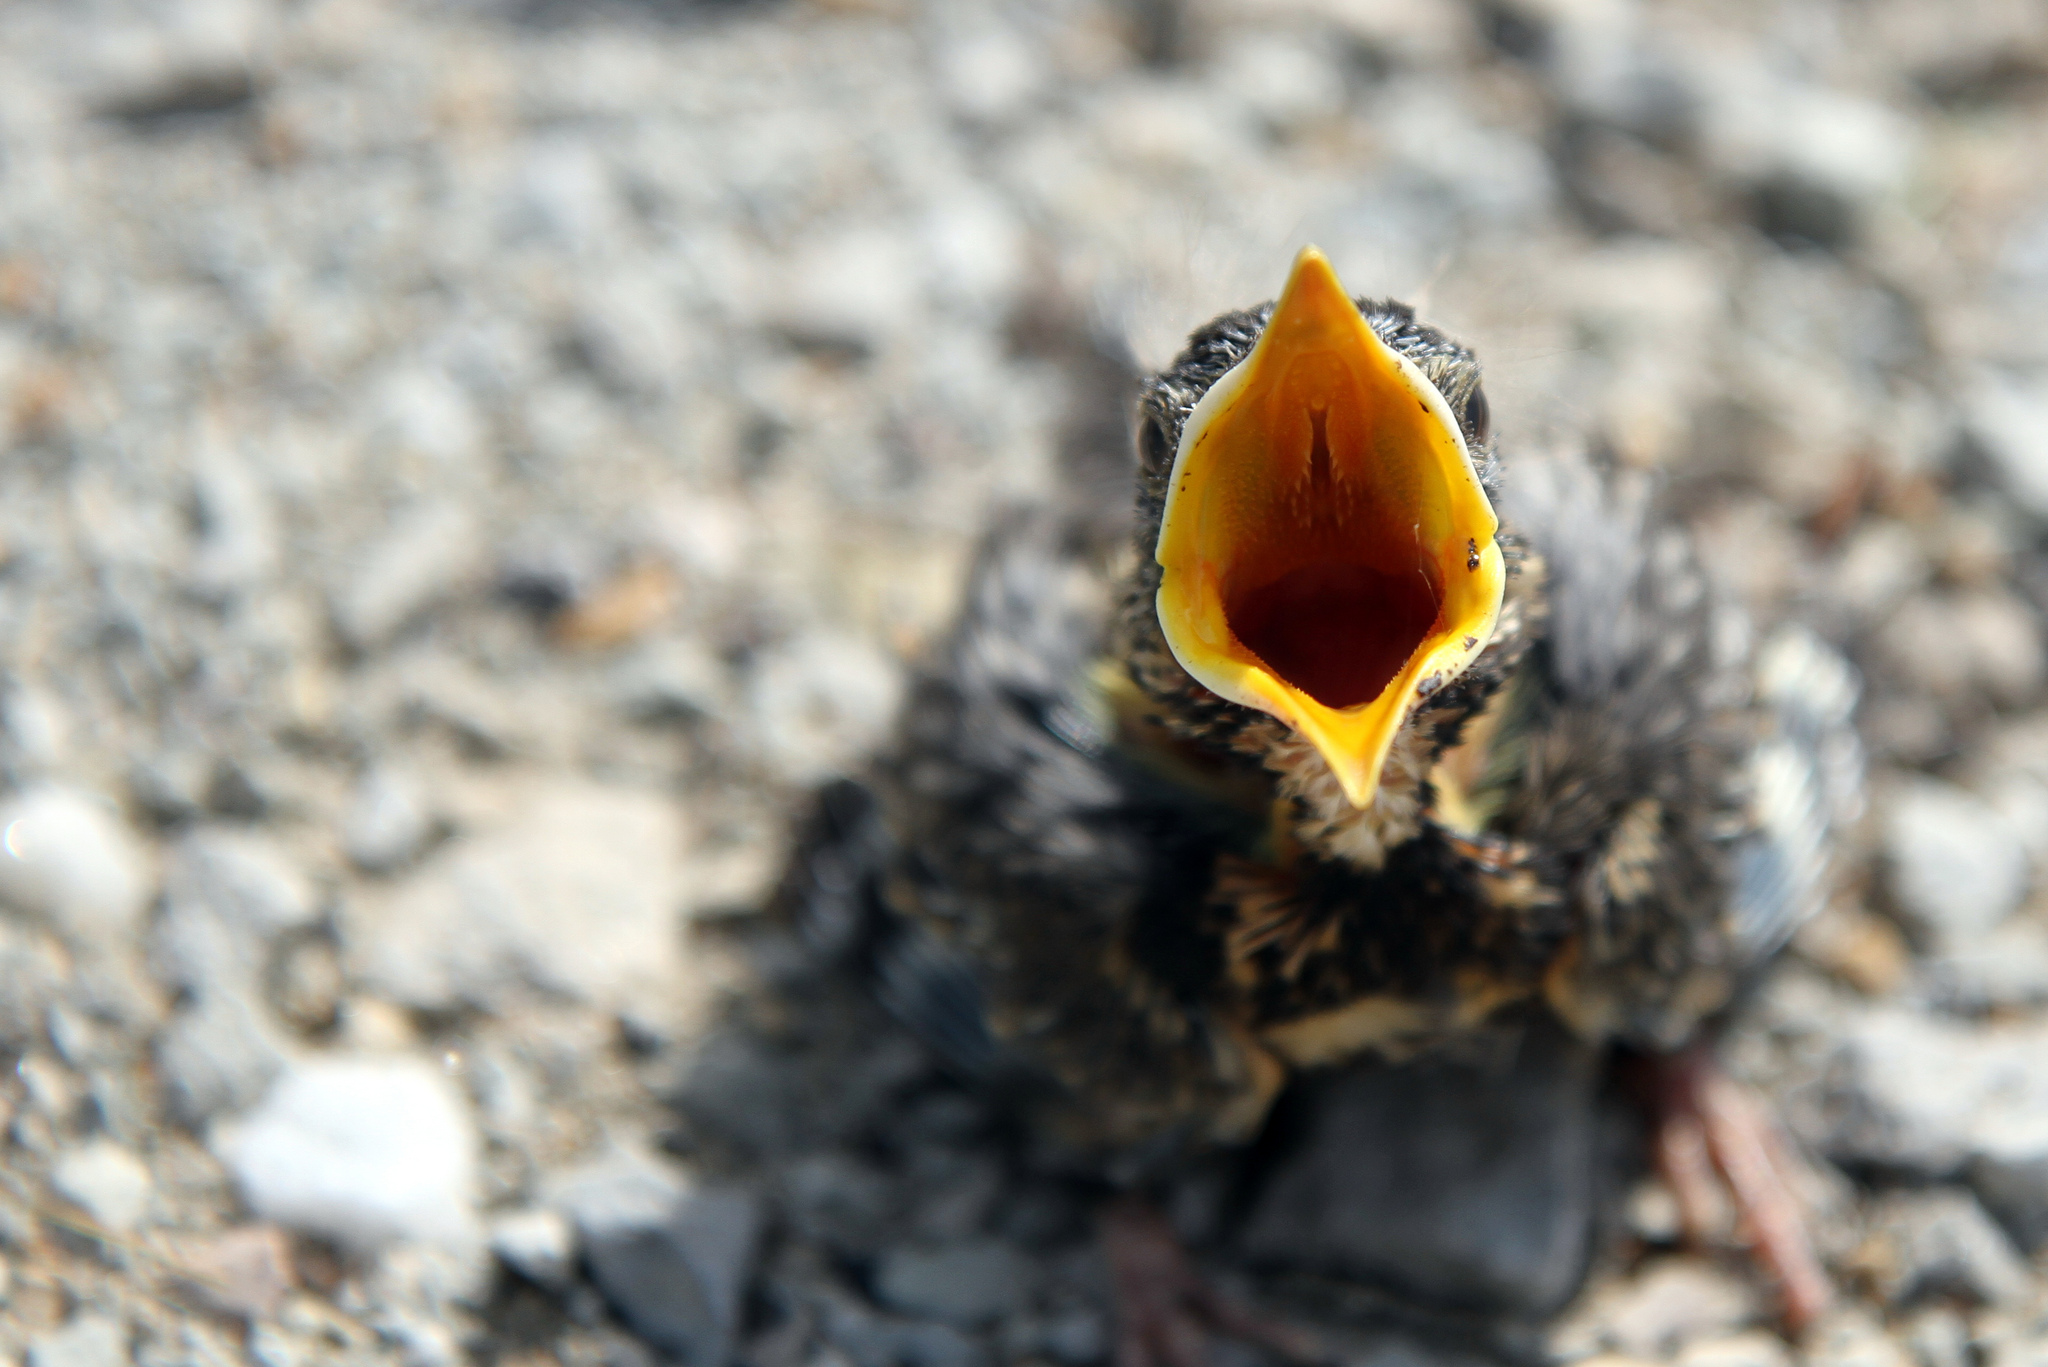 Should You Put a Baby Bird Back in the Nest? Depends If It's Cute ...